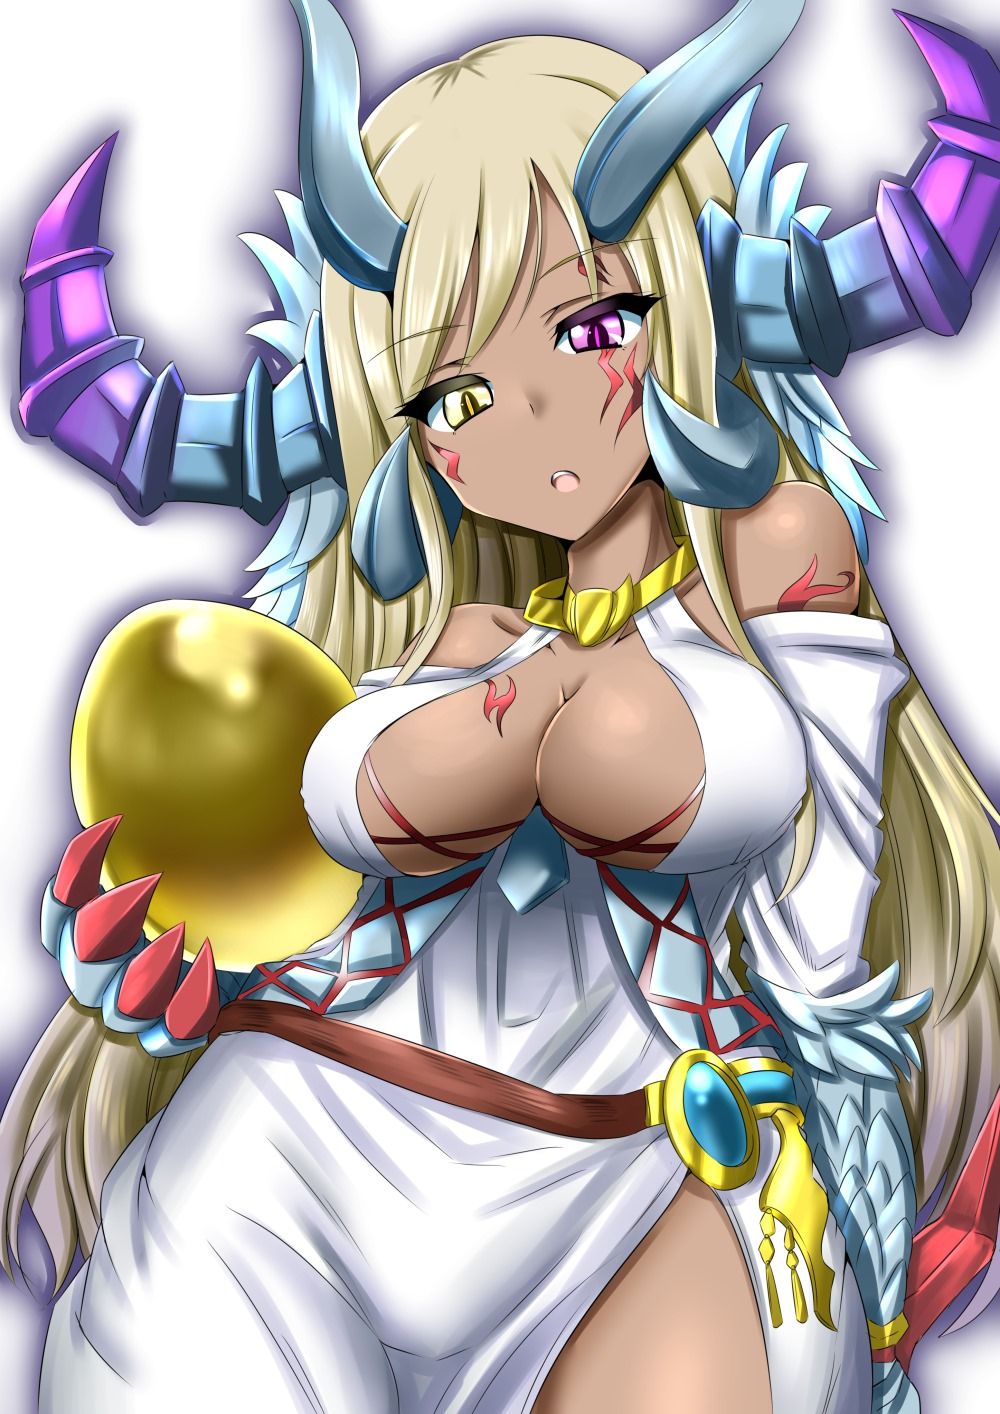 In puzzles & dragons thoroughly you want to nukinuki 31